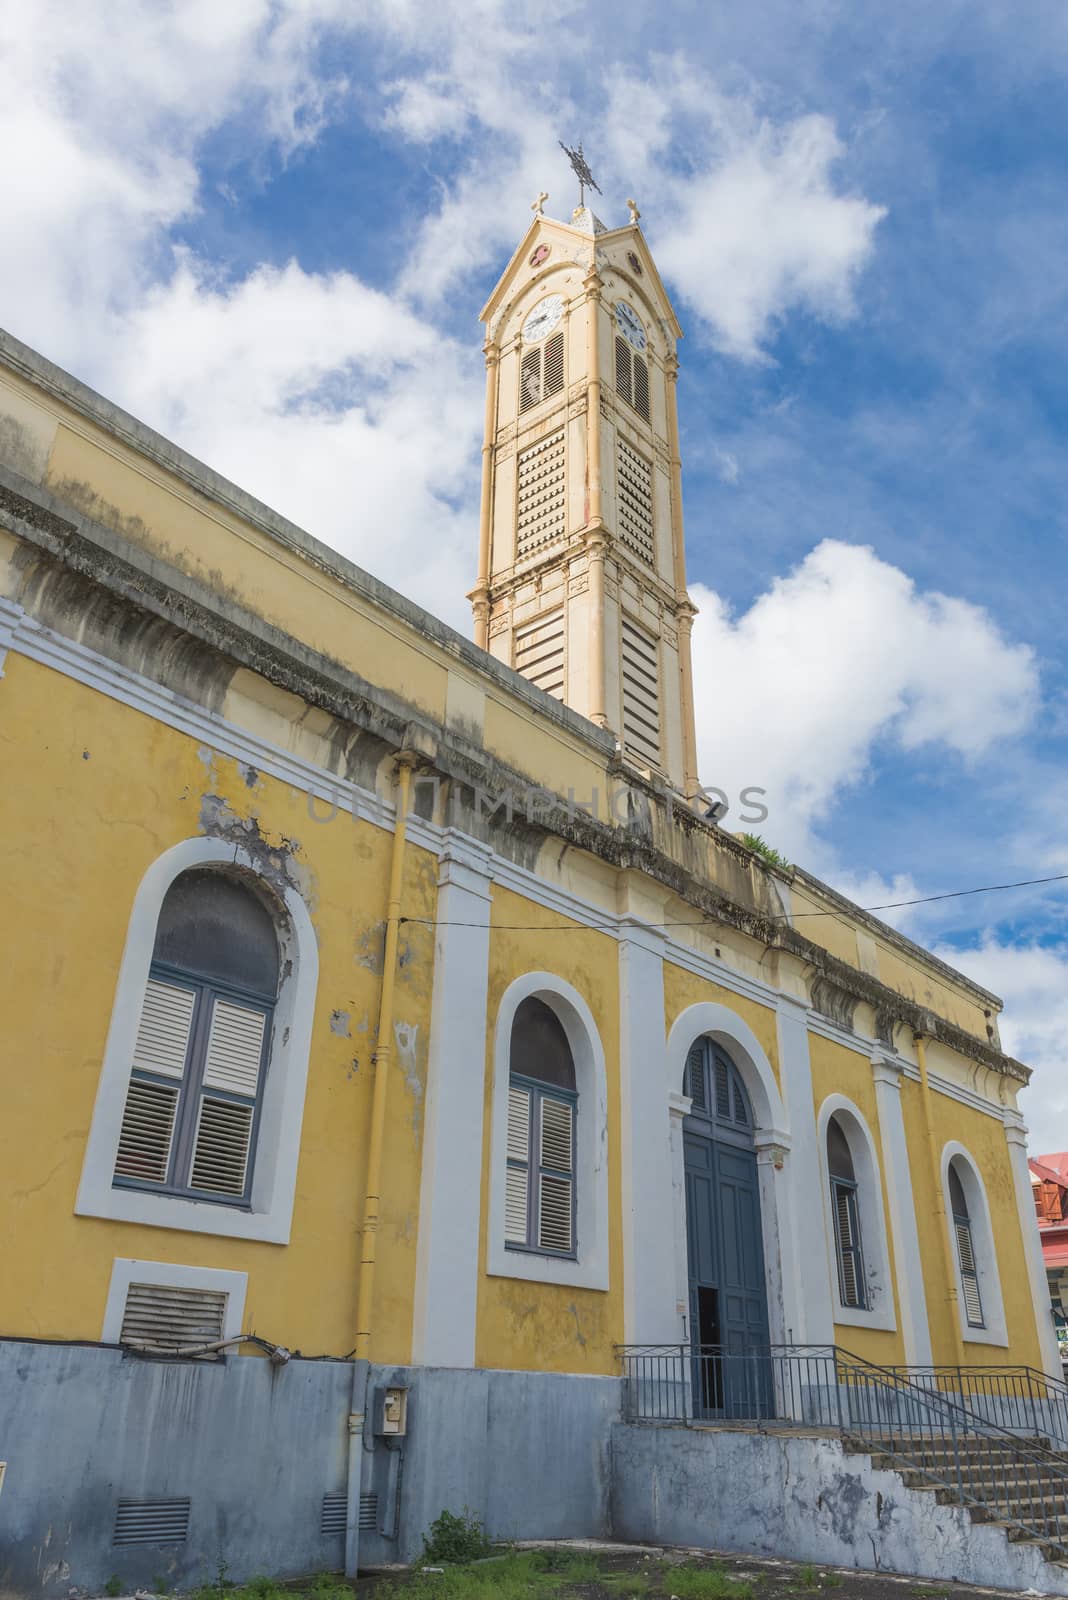 Cathedral Saint Pierre Saint Paul in Pointe-a-Pitre in Guadeloupe, French Caribbean